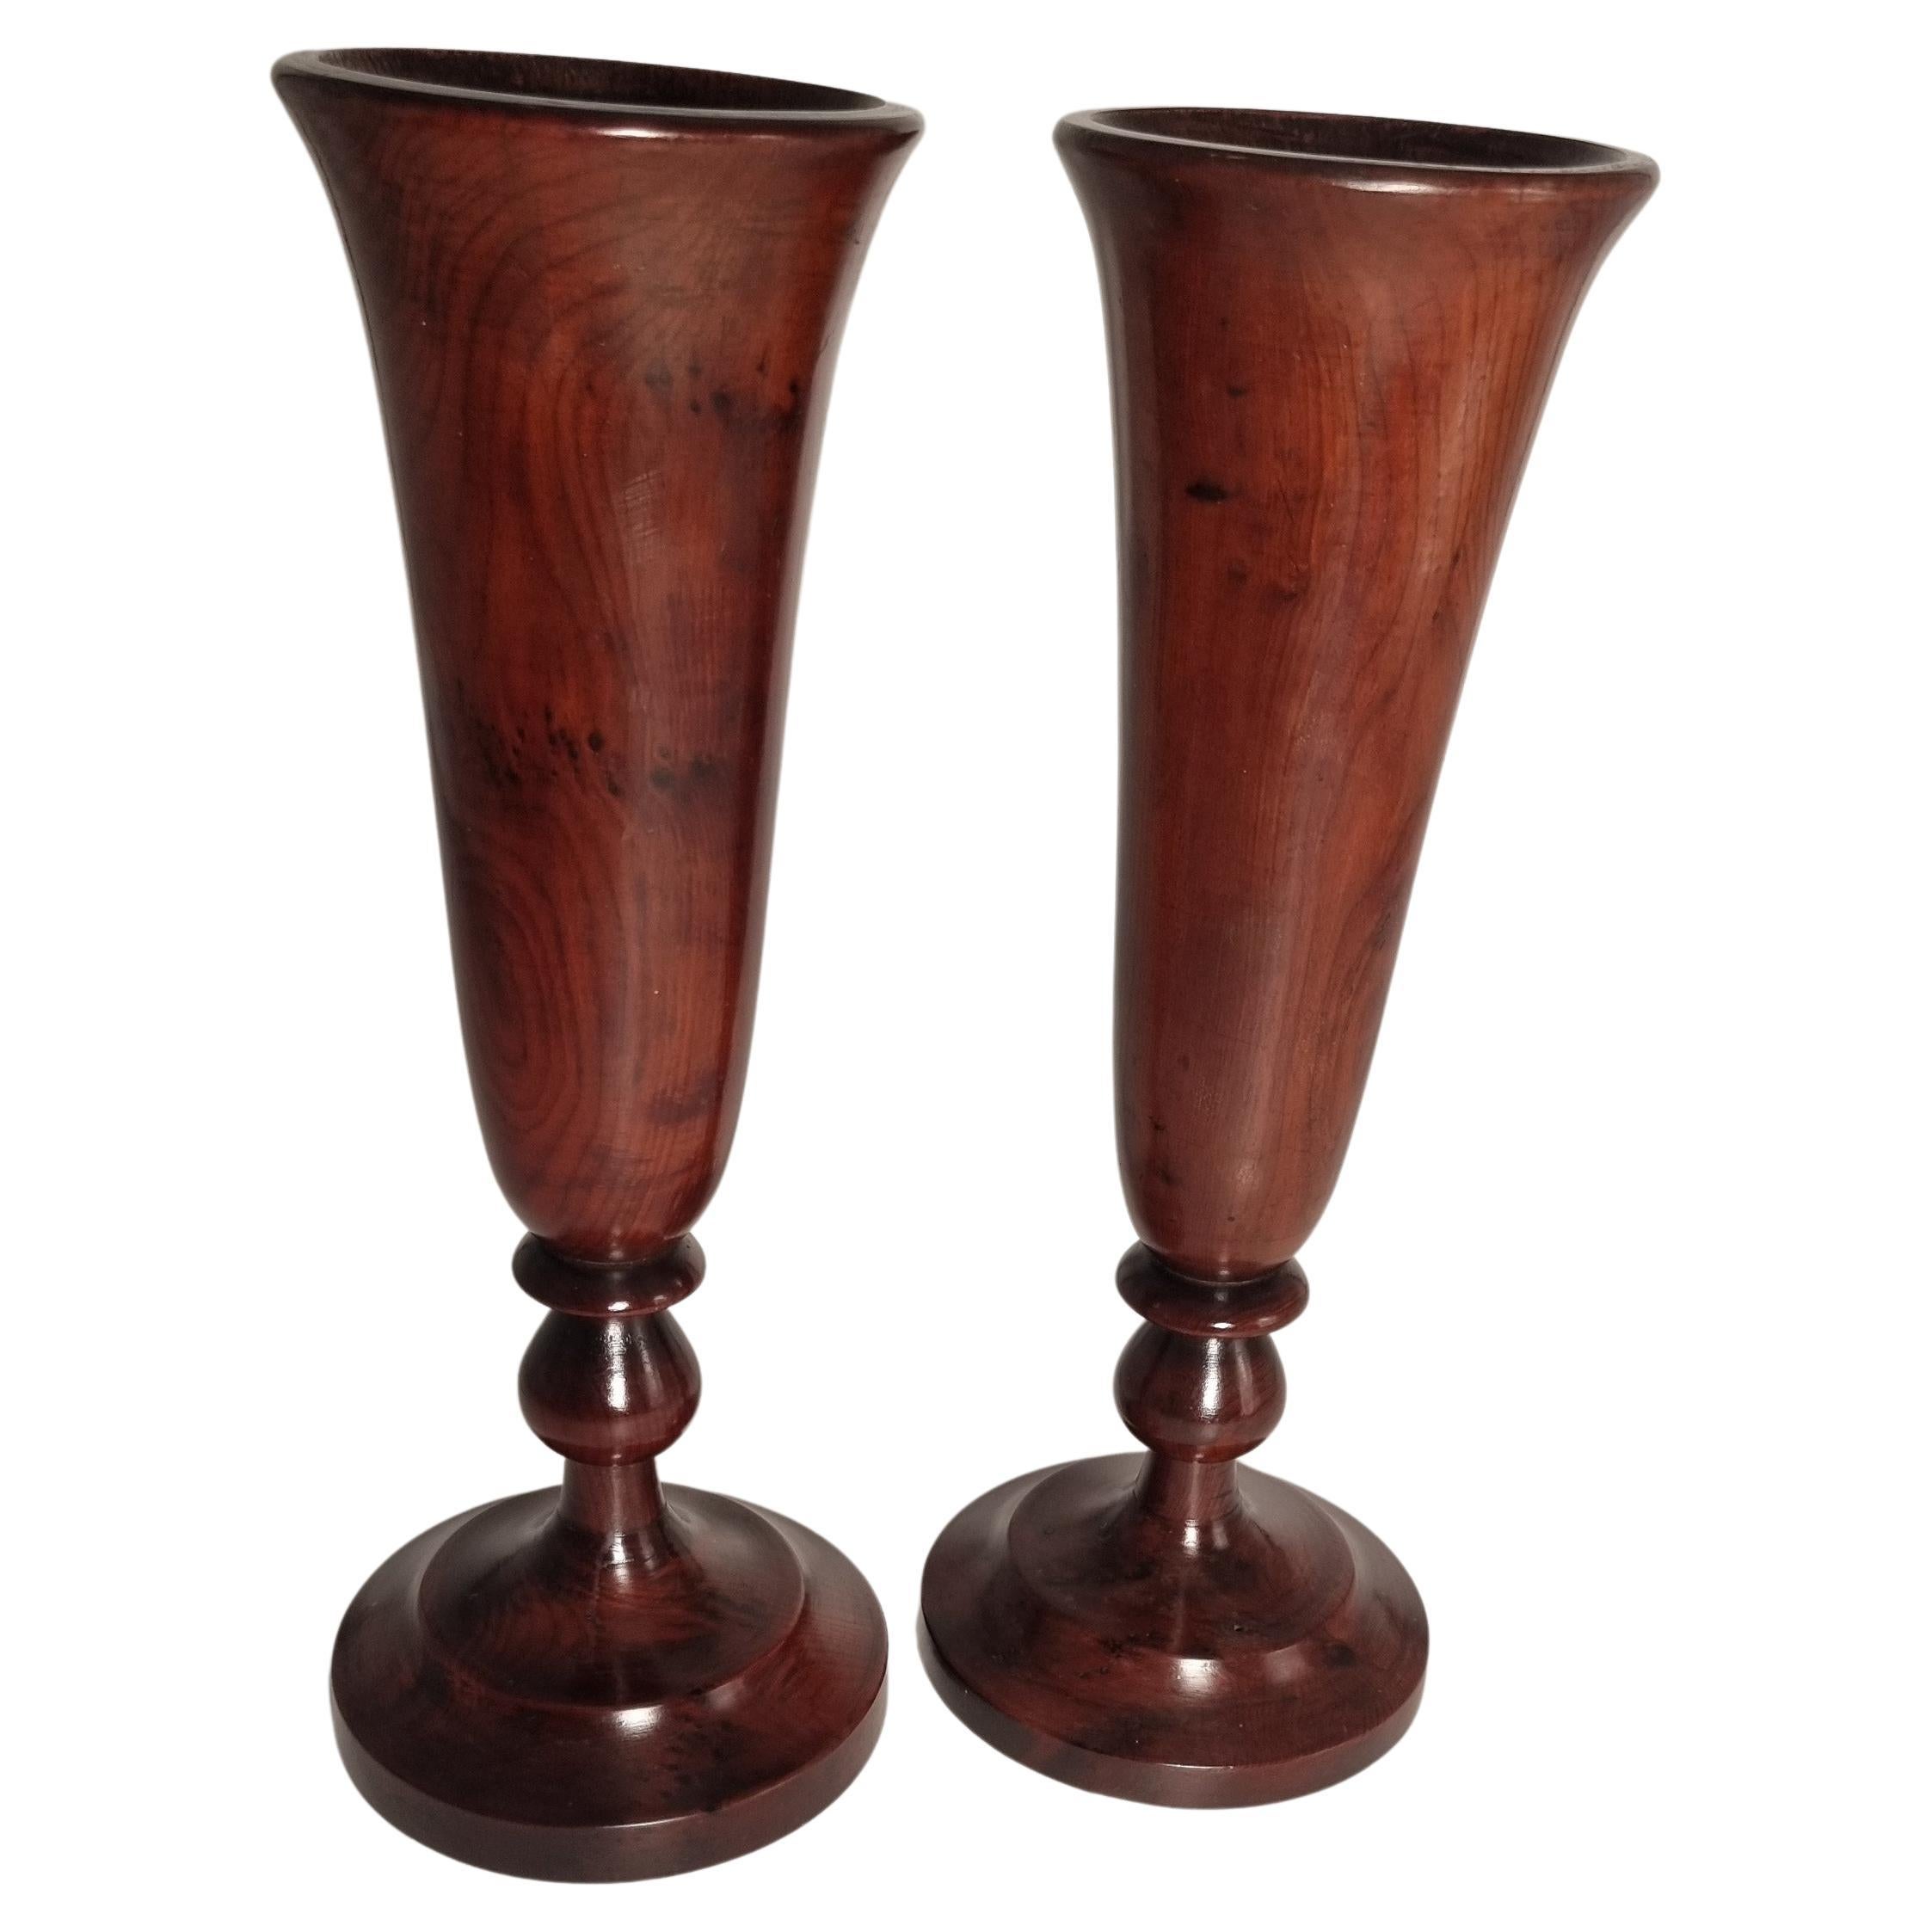 Yew Vases and Vessels